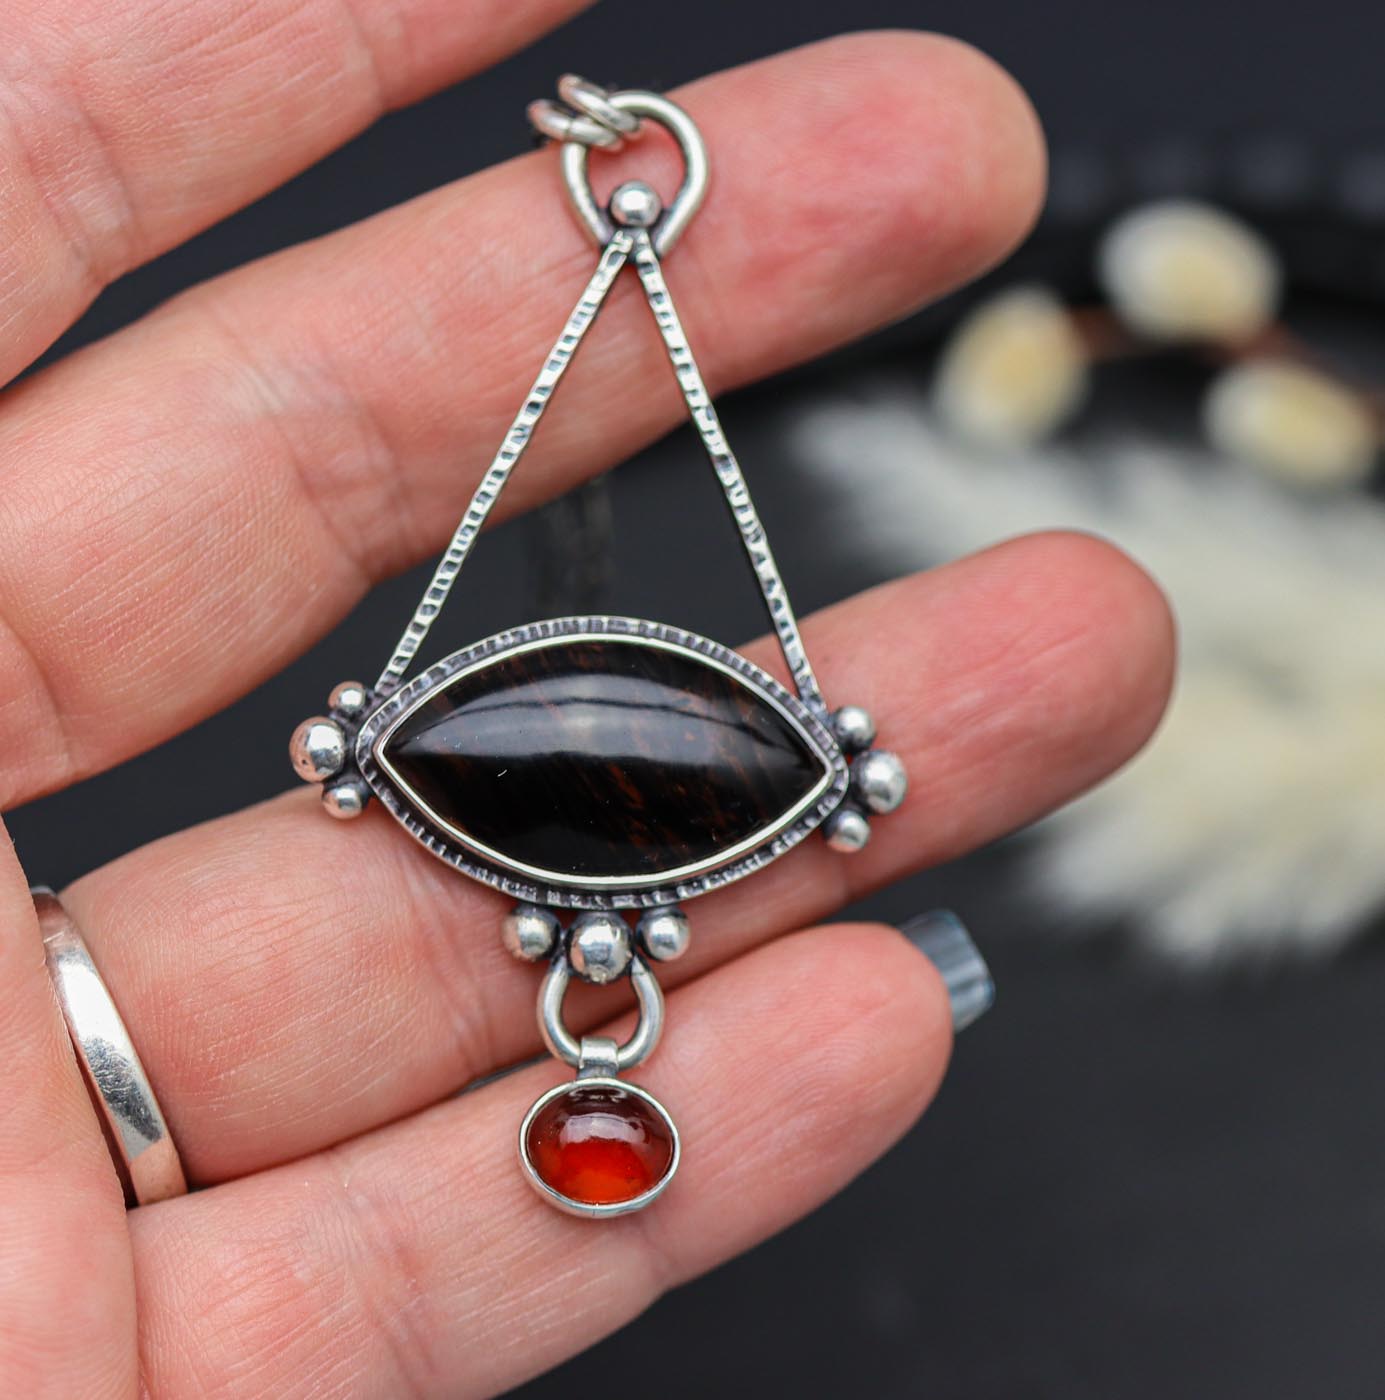 Mahogany Obsidian and Hessonite Garnet Pendant Sterling Silver Necklace